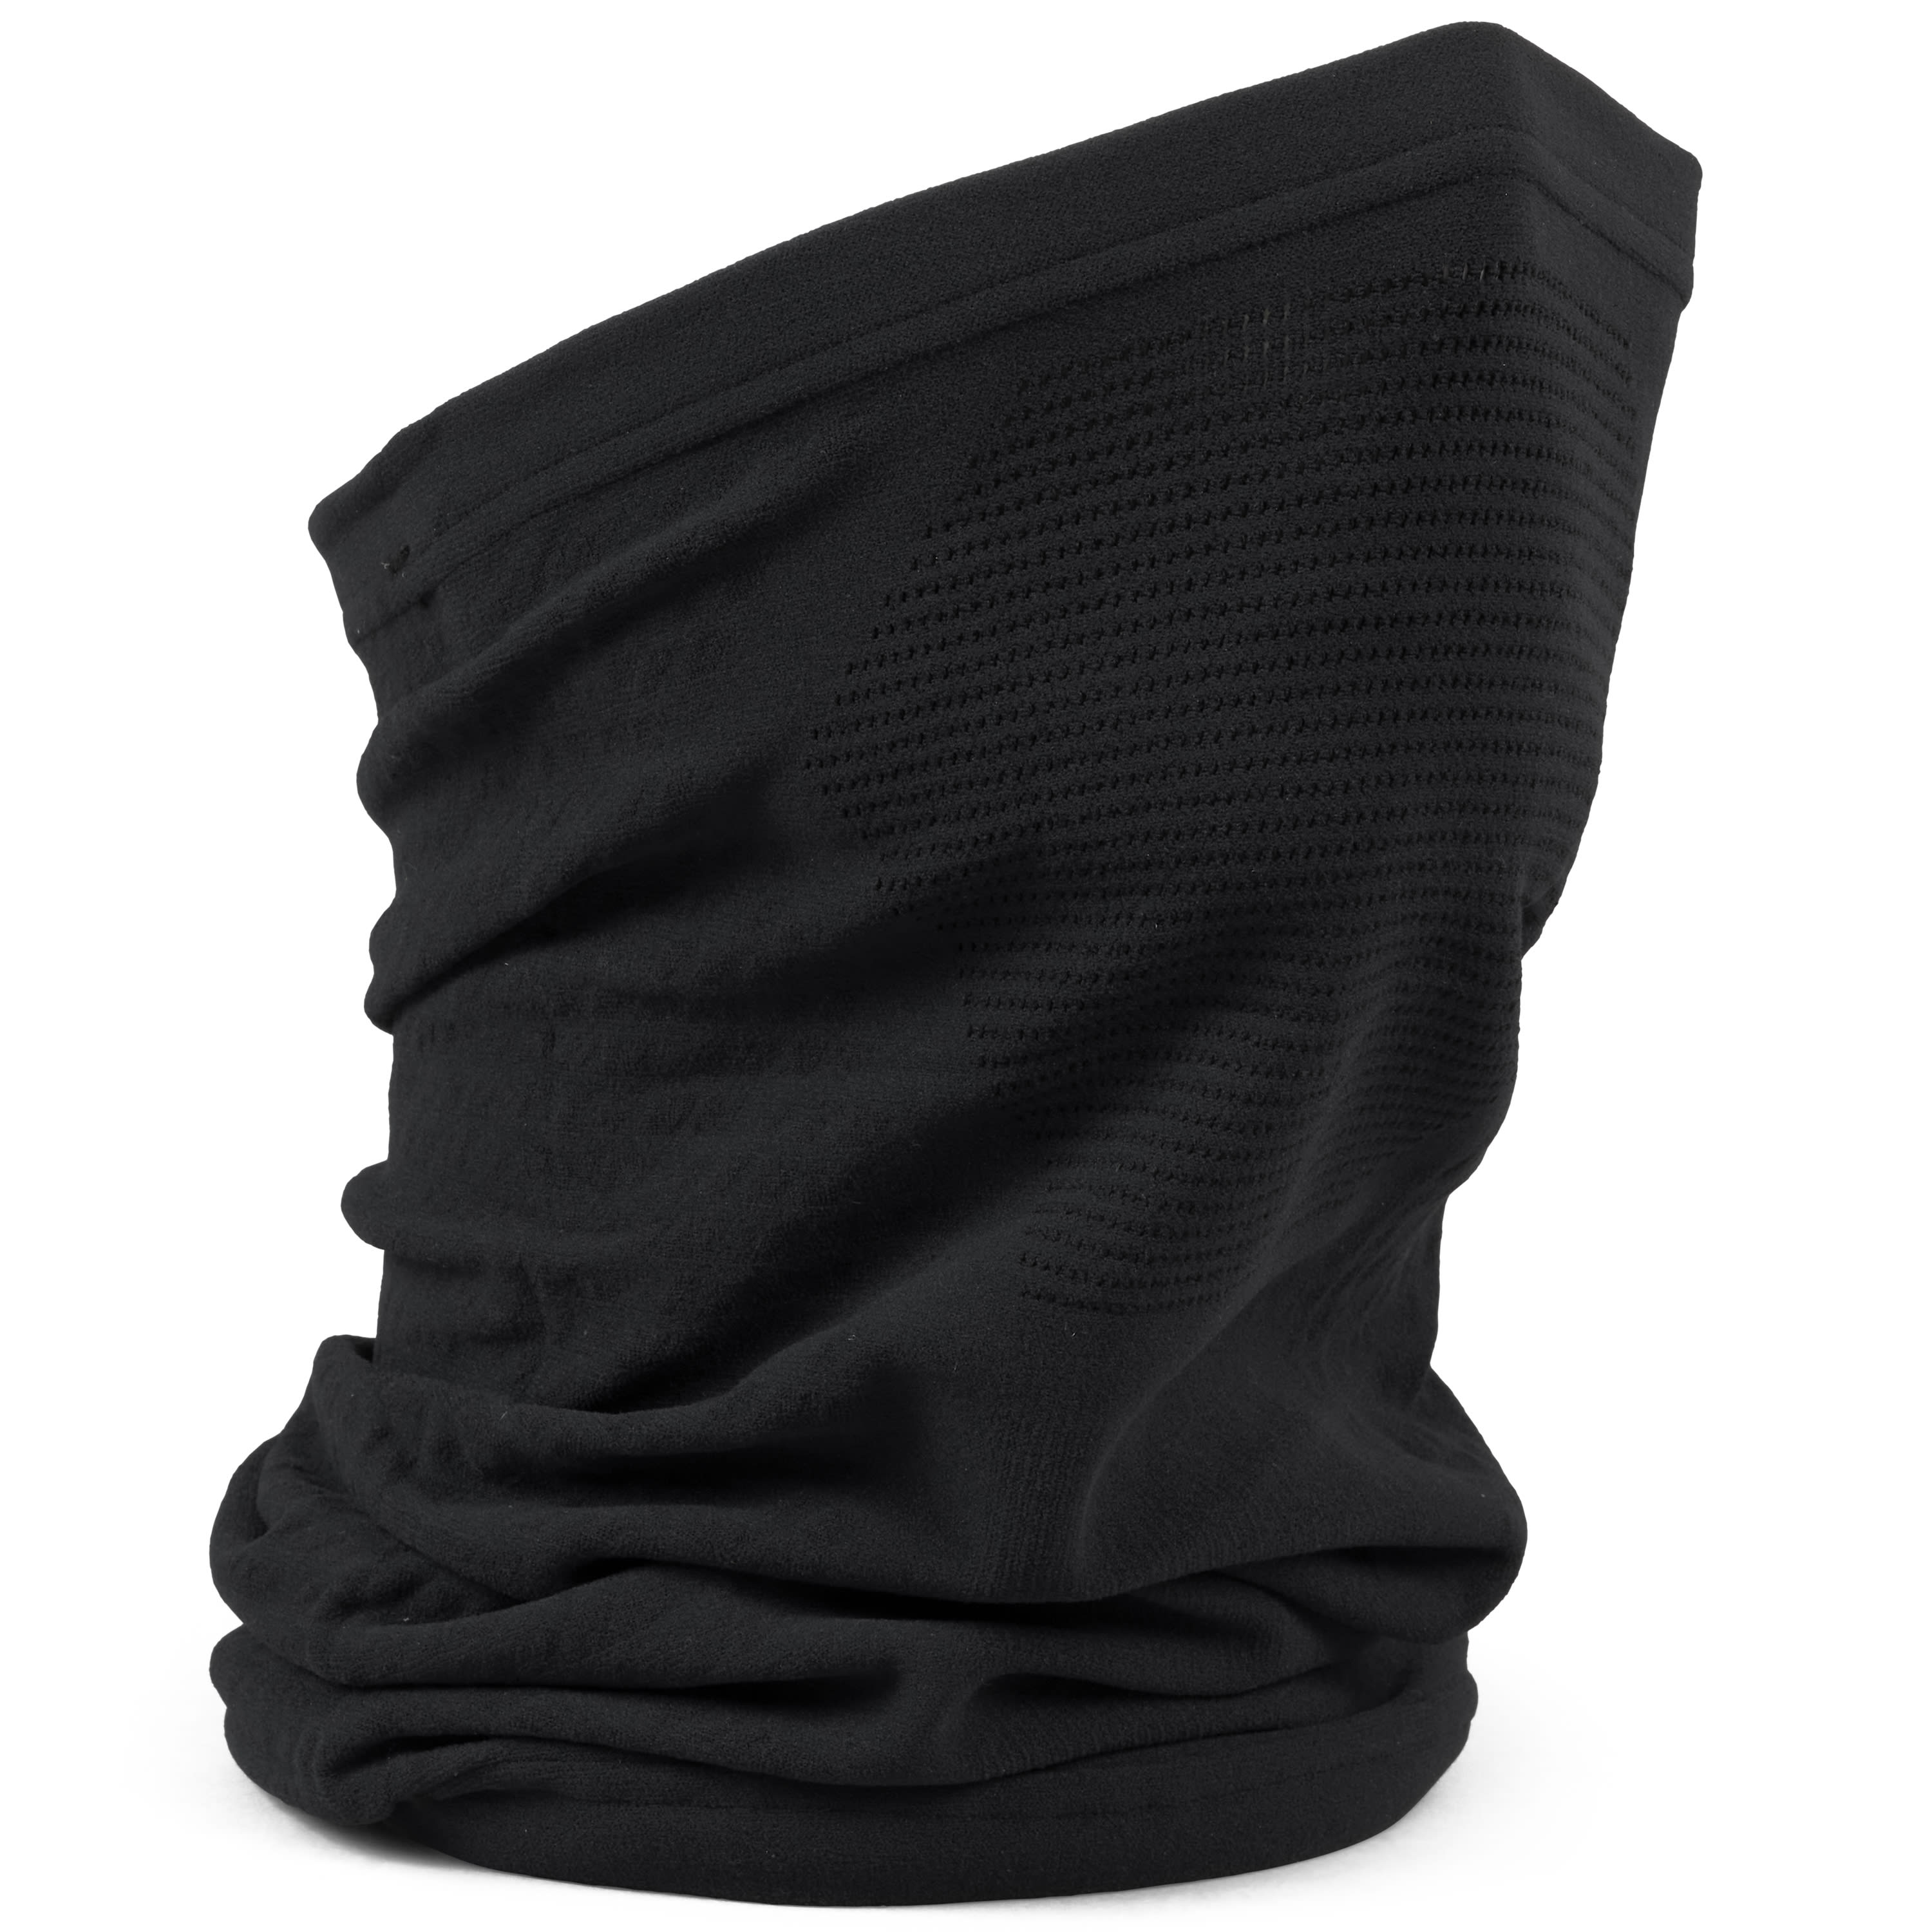 Buy Gripgrab Freedom Seamless Warp Knitted Neck Warmer from Outnorth